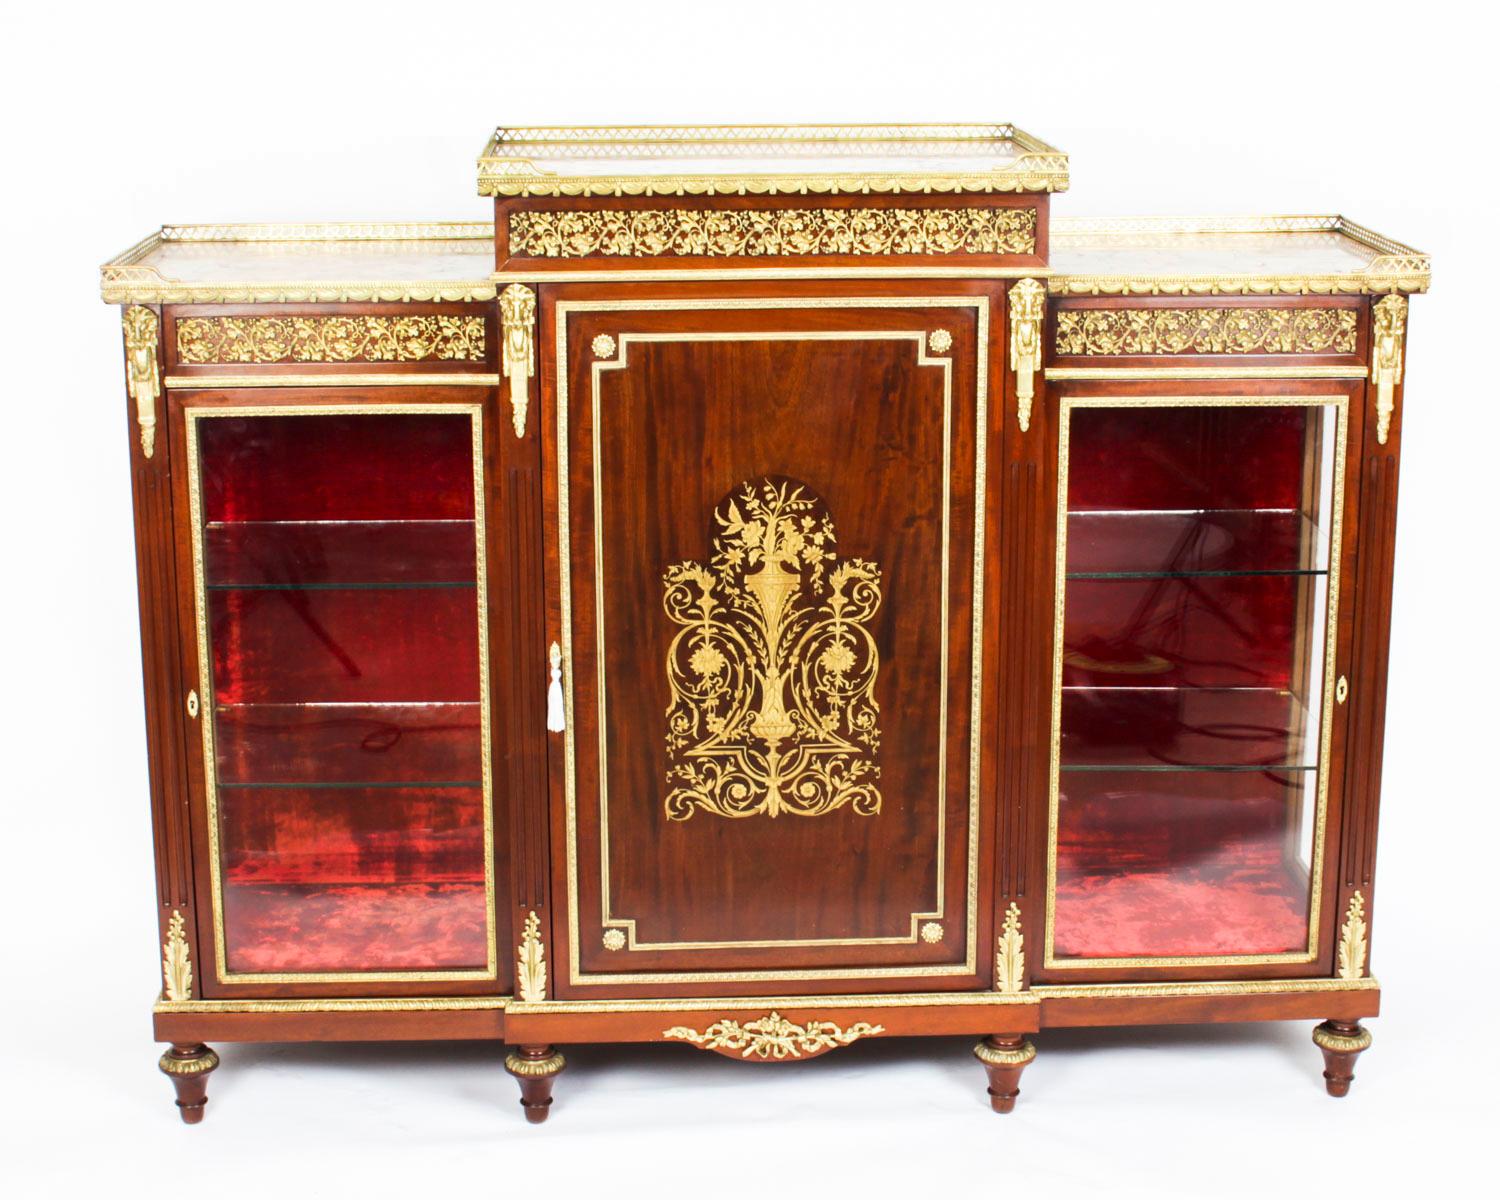 This is an absolutely exquisite exhibition quality antique Napoleon III, flame mahogany and cut brass inlaid Boulle breakfront credenza, circa 1860 in date.
This striking credenza is profusely decorated with fabulous ormolu mounts and a striking